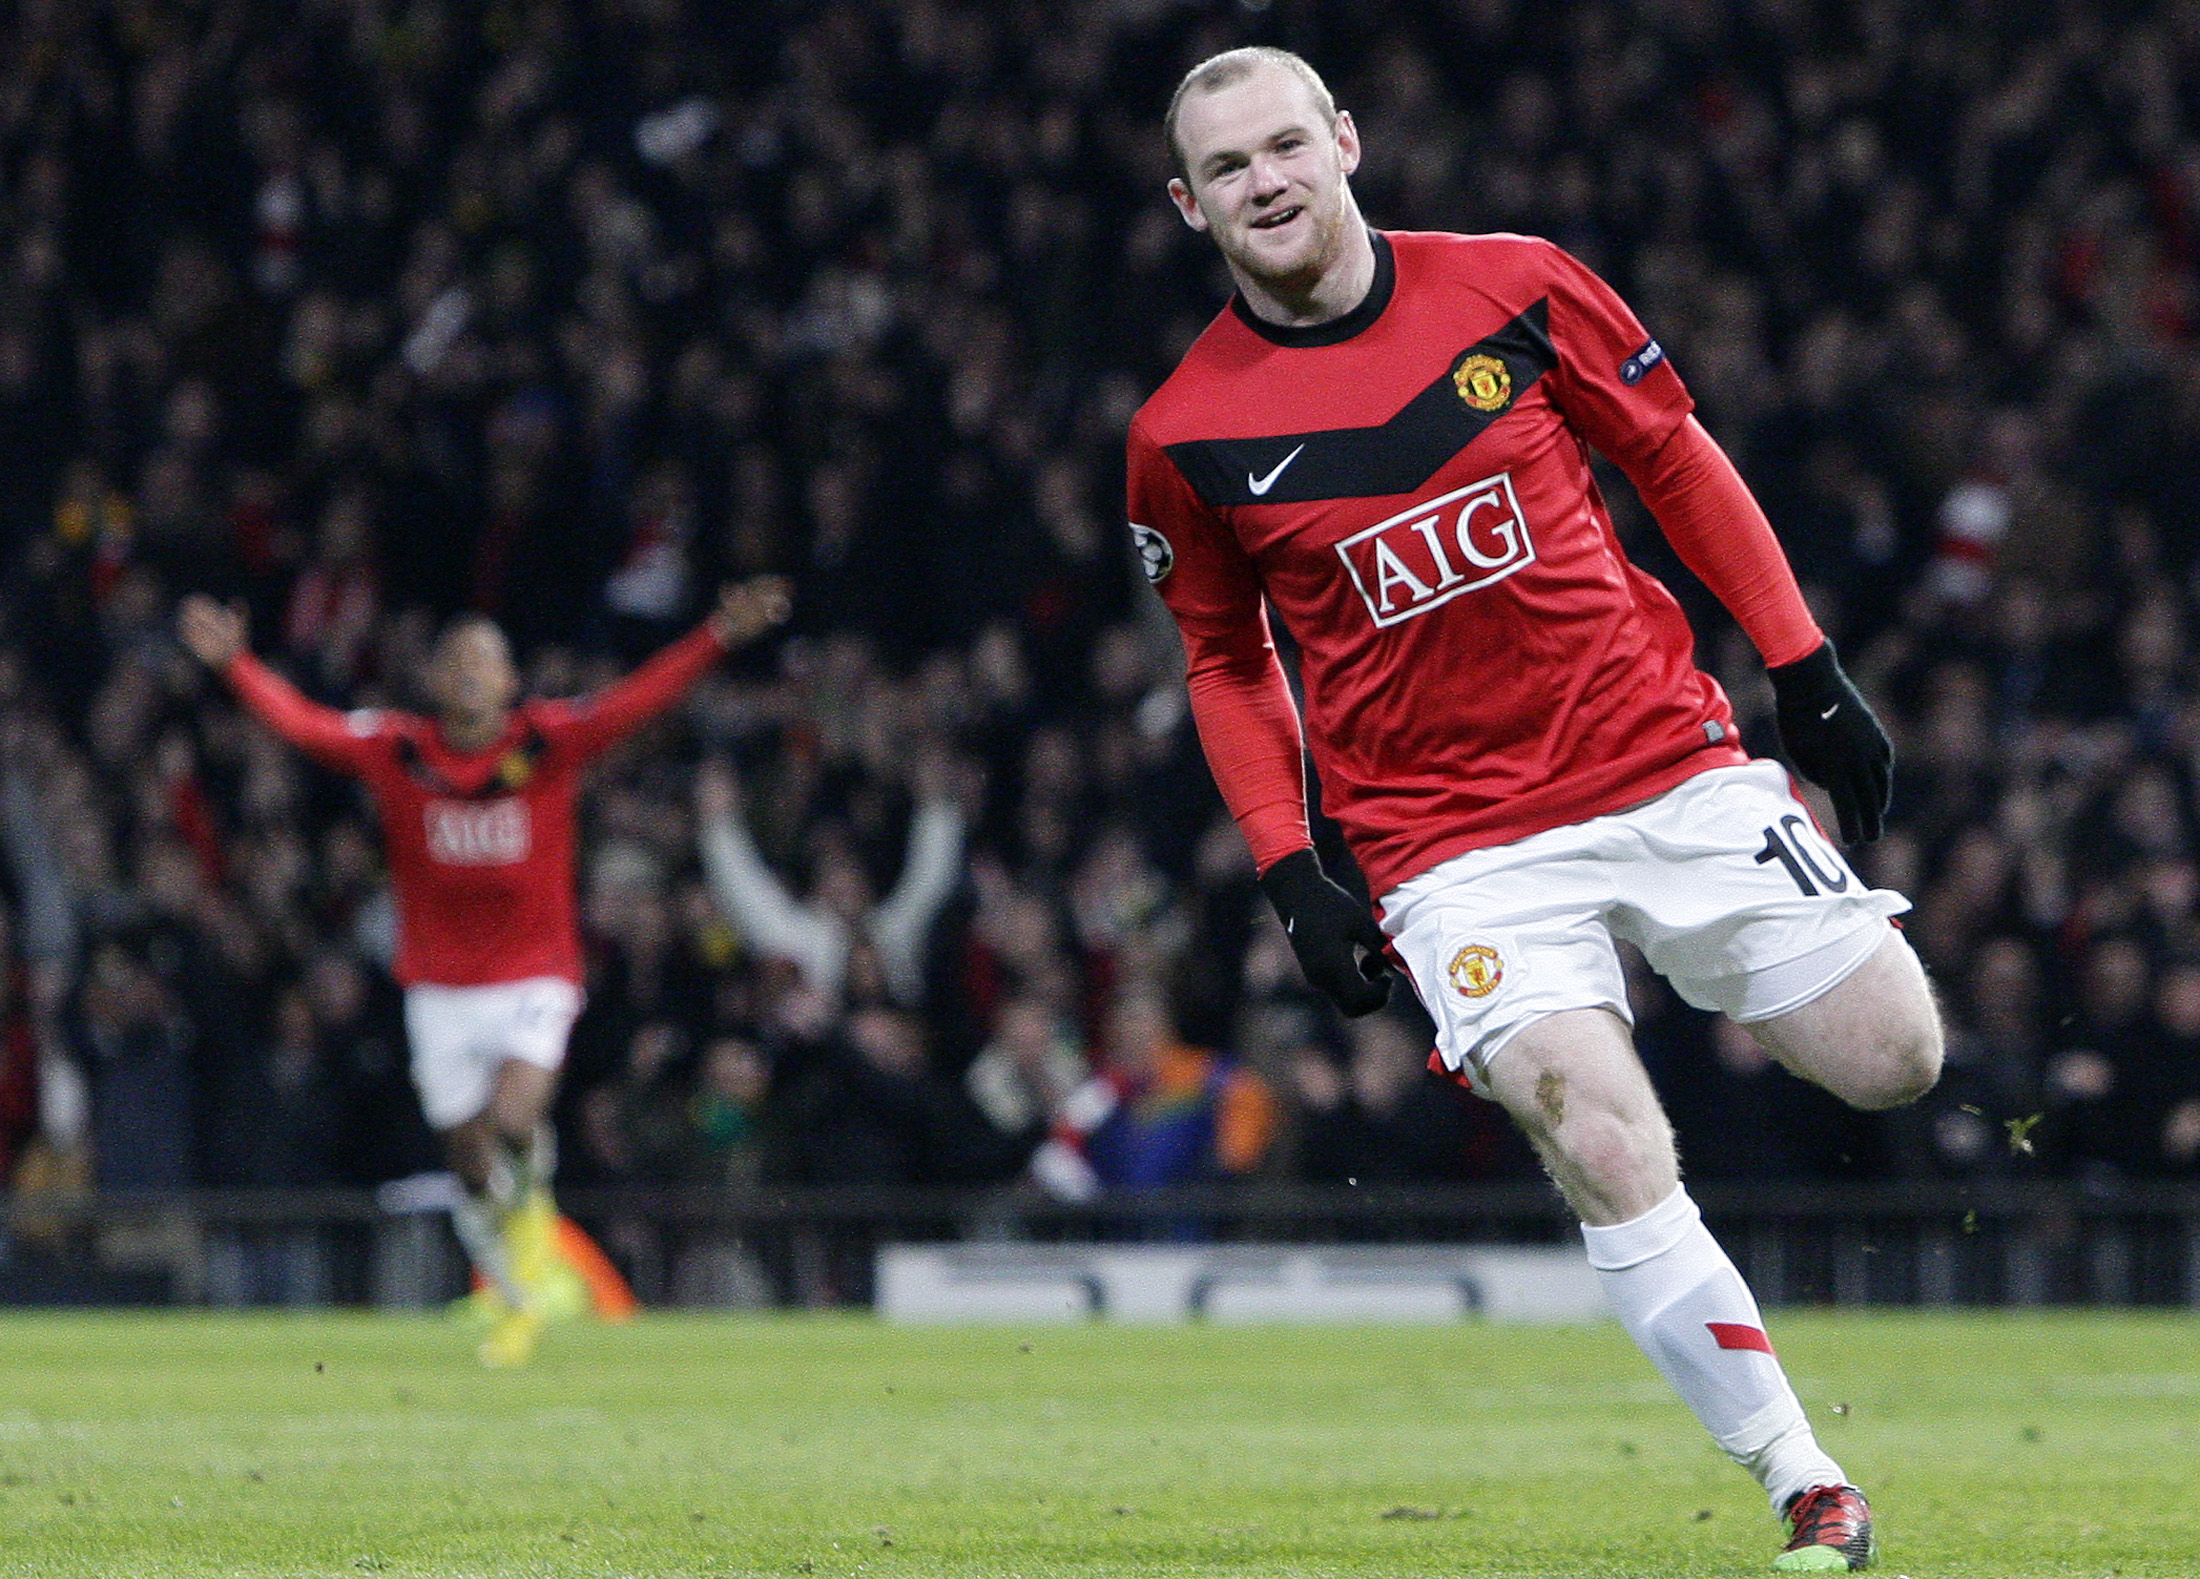 Manchester United, Champions League, Lionel Messi, Wayne Rooney, Barcelona